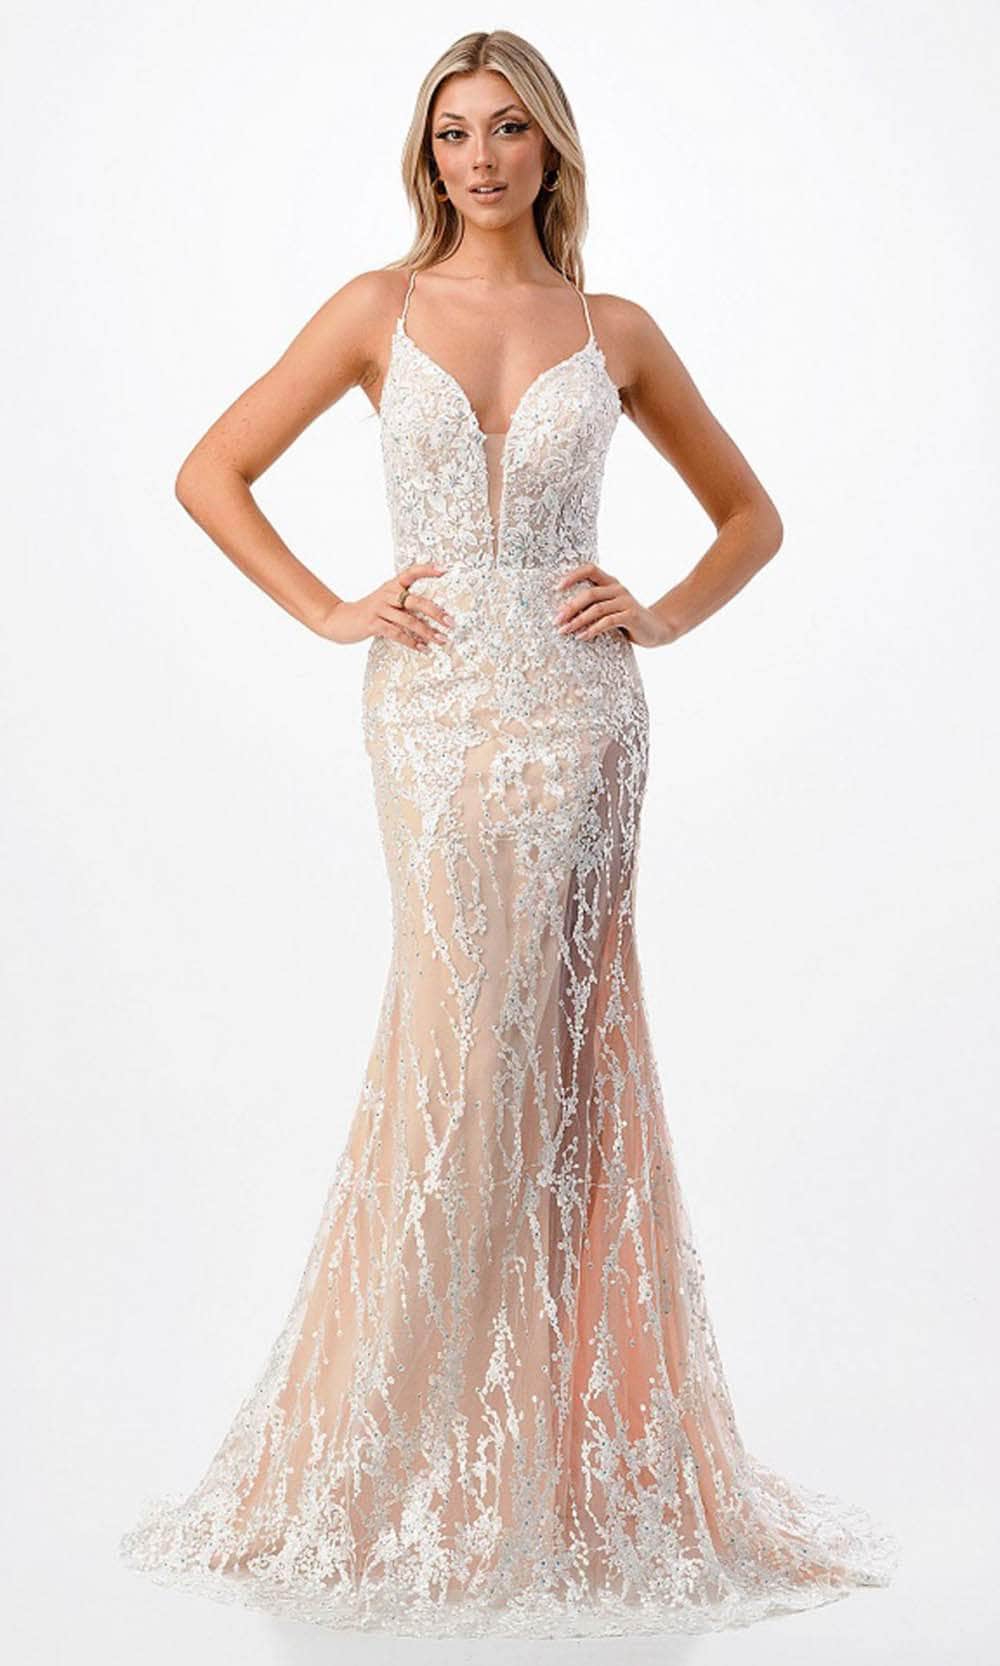 Image of Aspeed Design P2211 - Plunging Embroidered Sleeveless Prom Dress